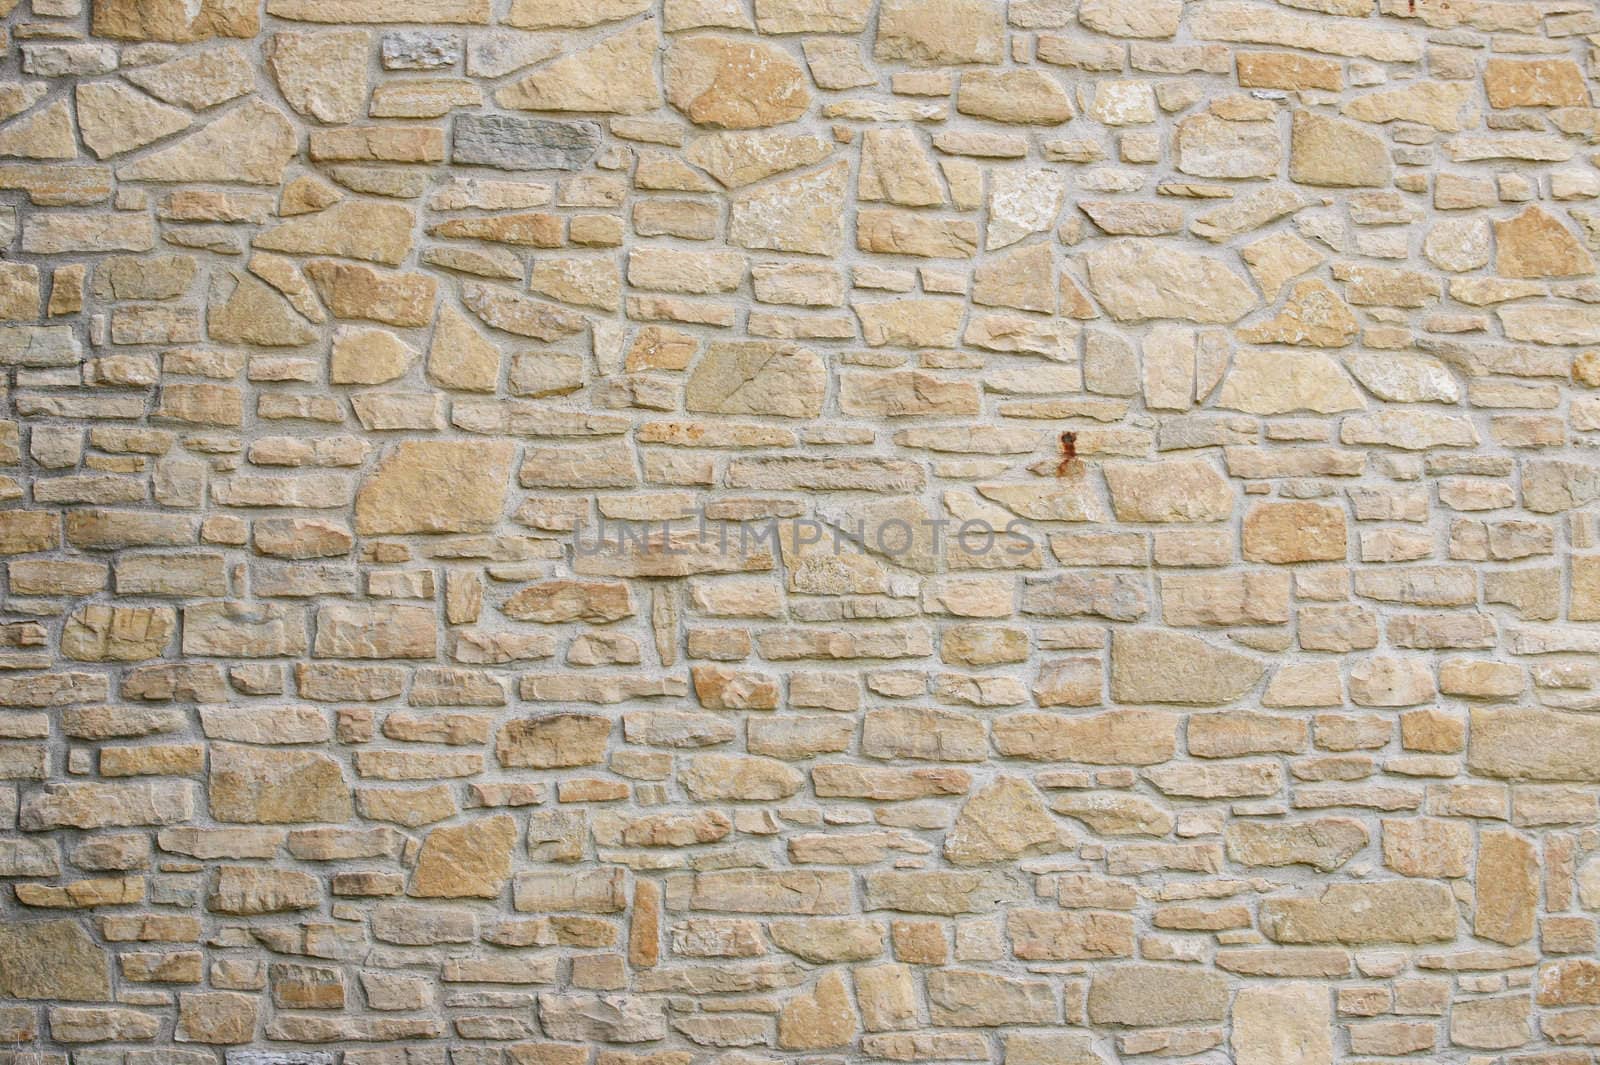 Large expanse of Beige stone wall